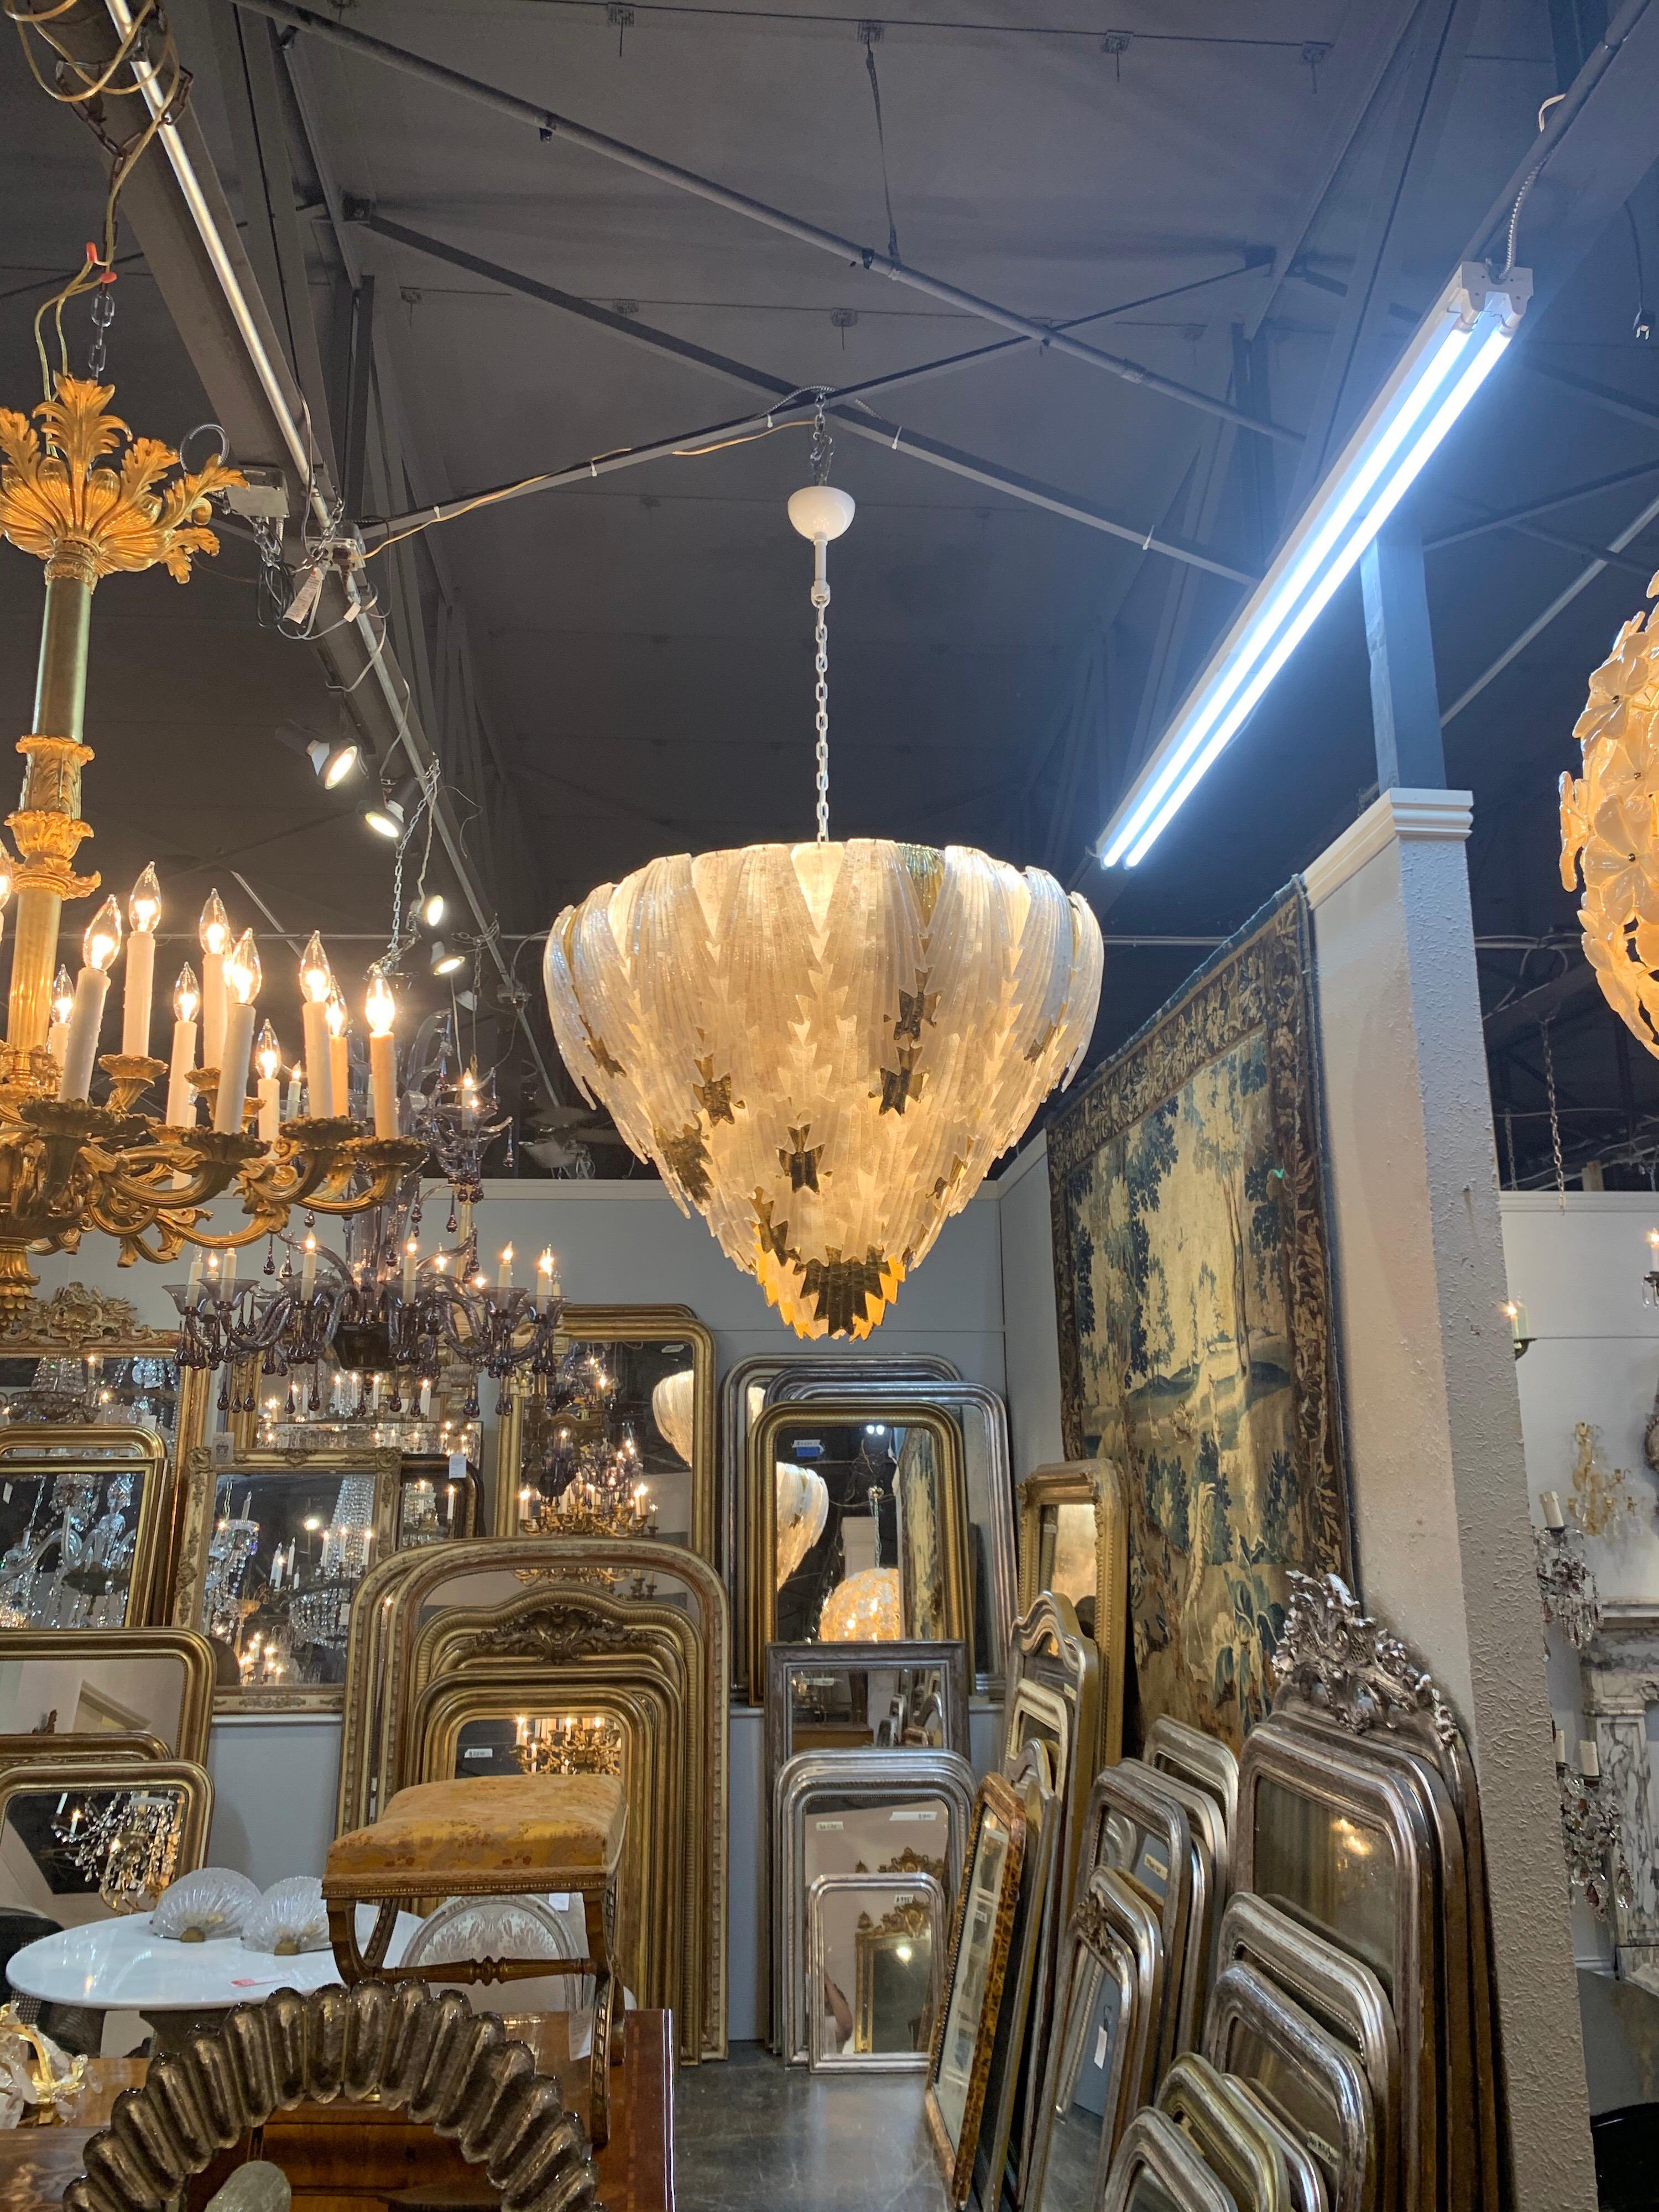 Extraordinary large scale Murano white and gold glass leaf form waterfall chandelier. 
Intertwined white and gold leaves creating a beautiful cascading effect. A truly unique and beautiful fixture. Stunning!